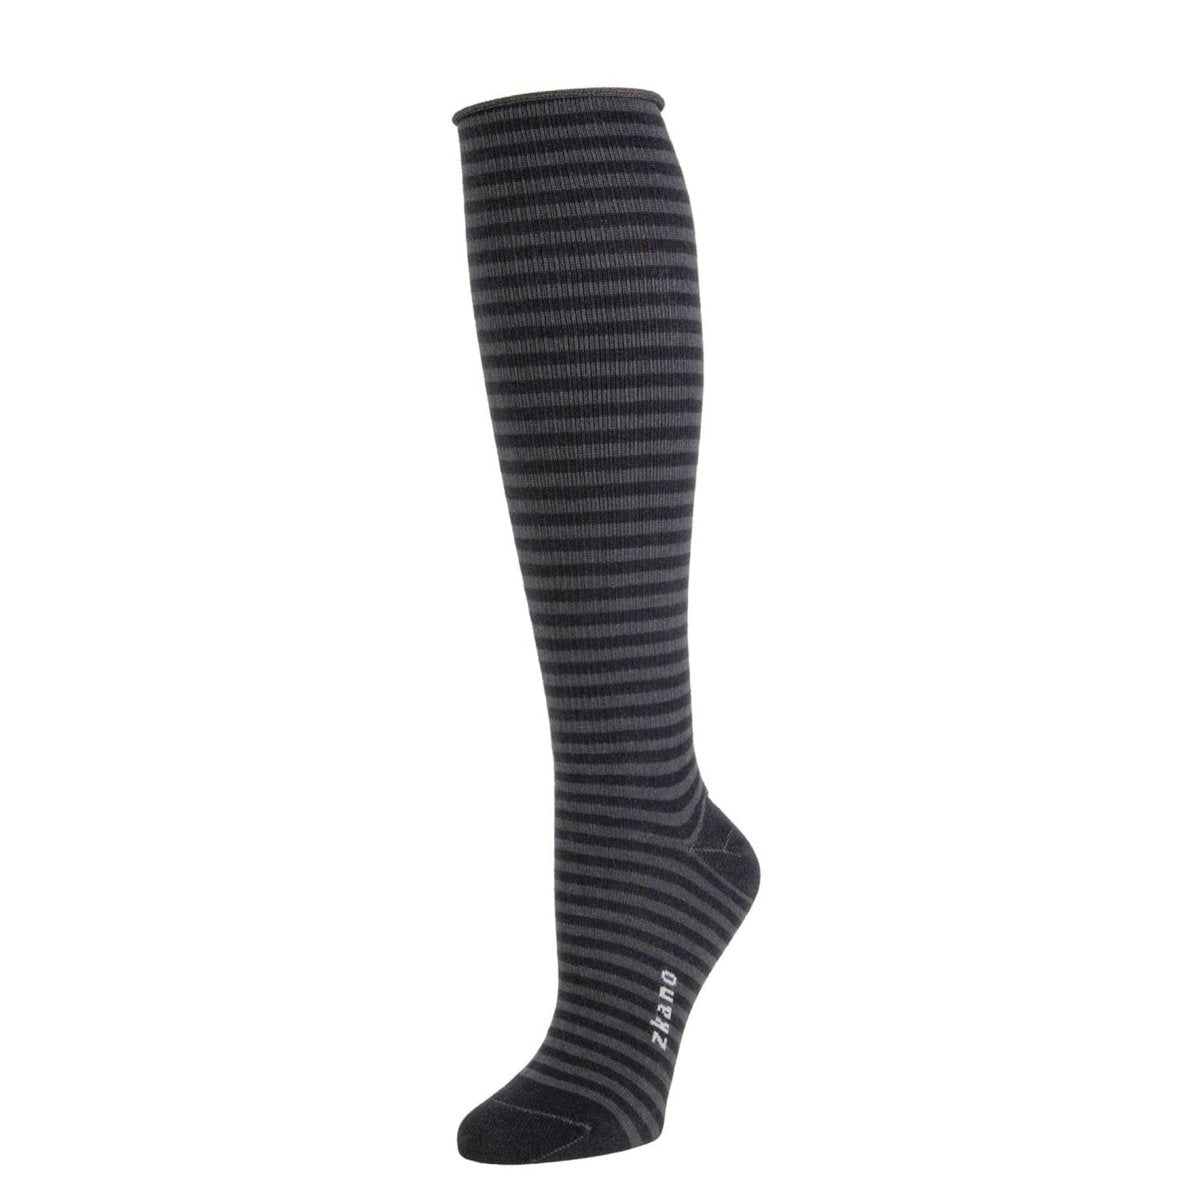 A dark grey ribbed knee sock with a black striped patter. The Annabel Knee Sock in Black Stripe is from Zkano and made in Alabama, USA.